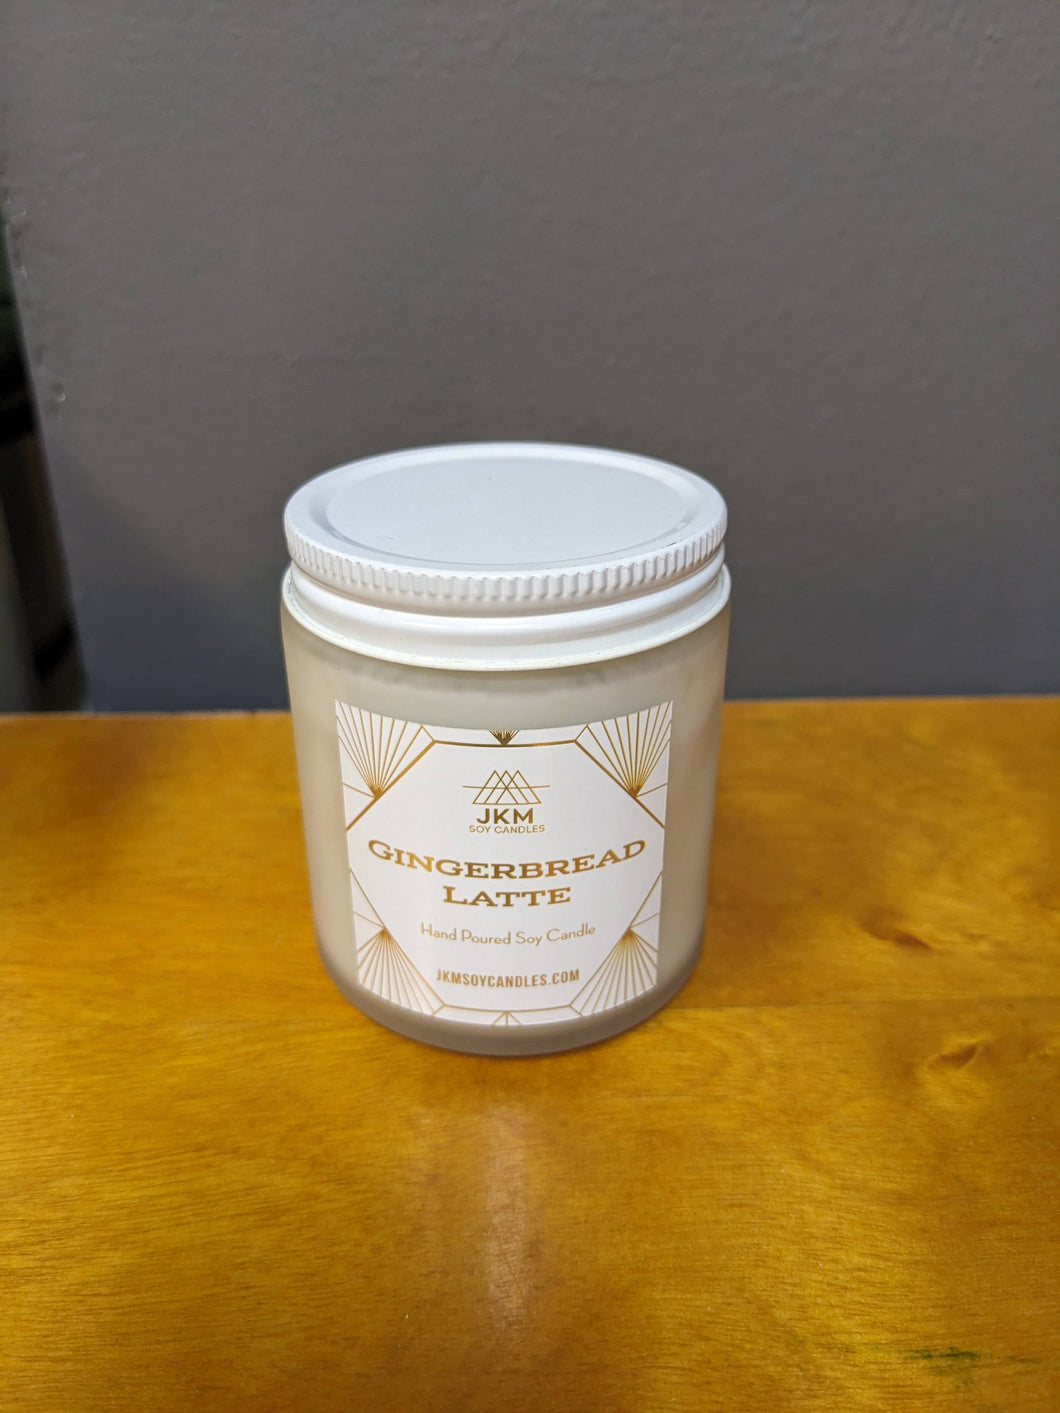 Gingerbread Latte Candle